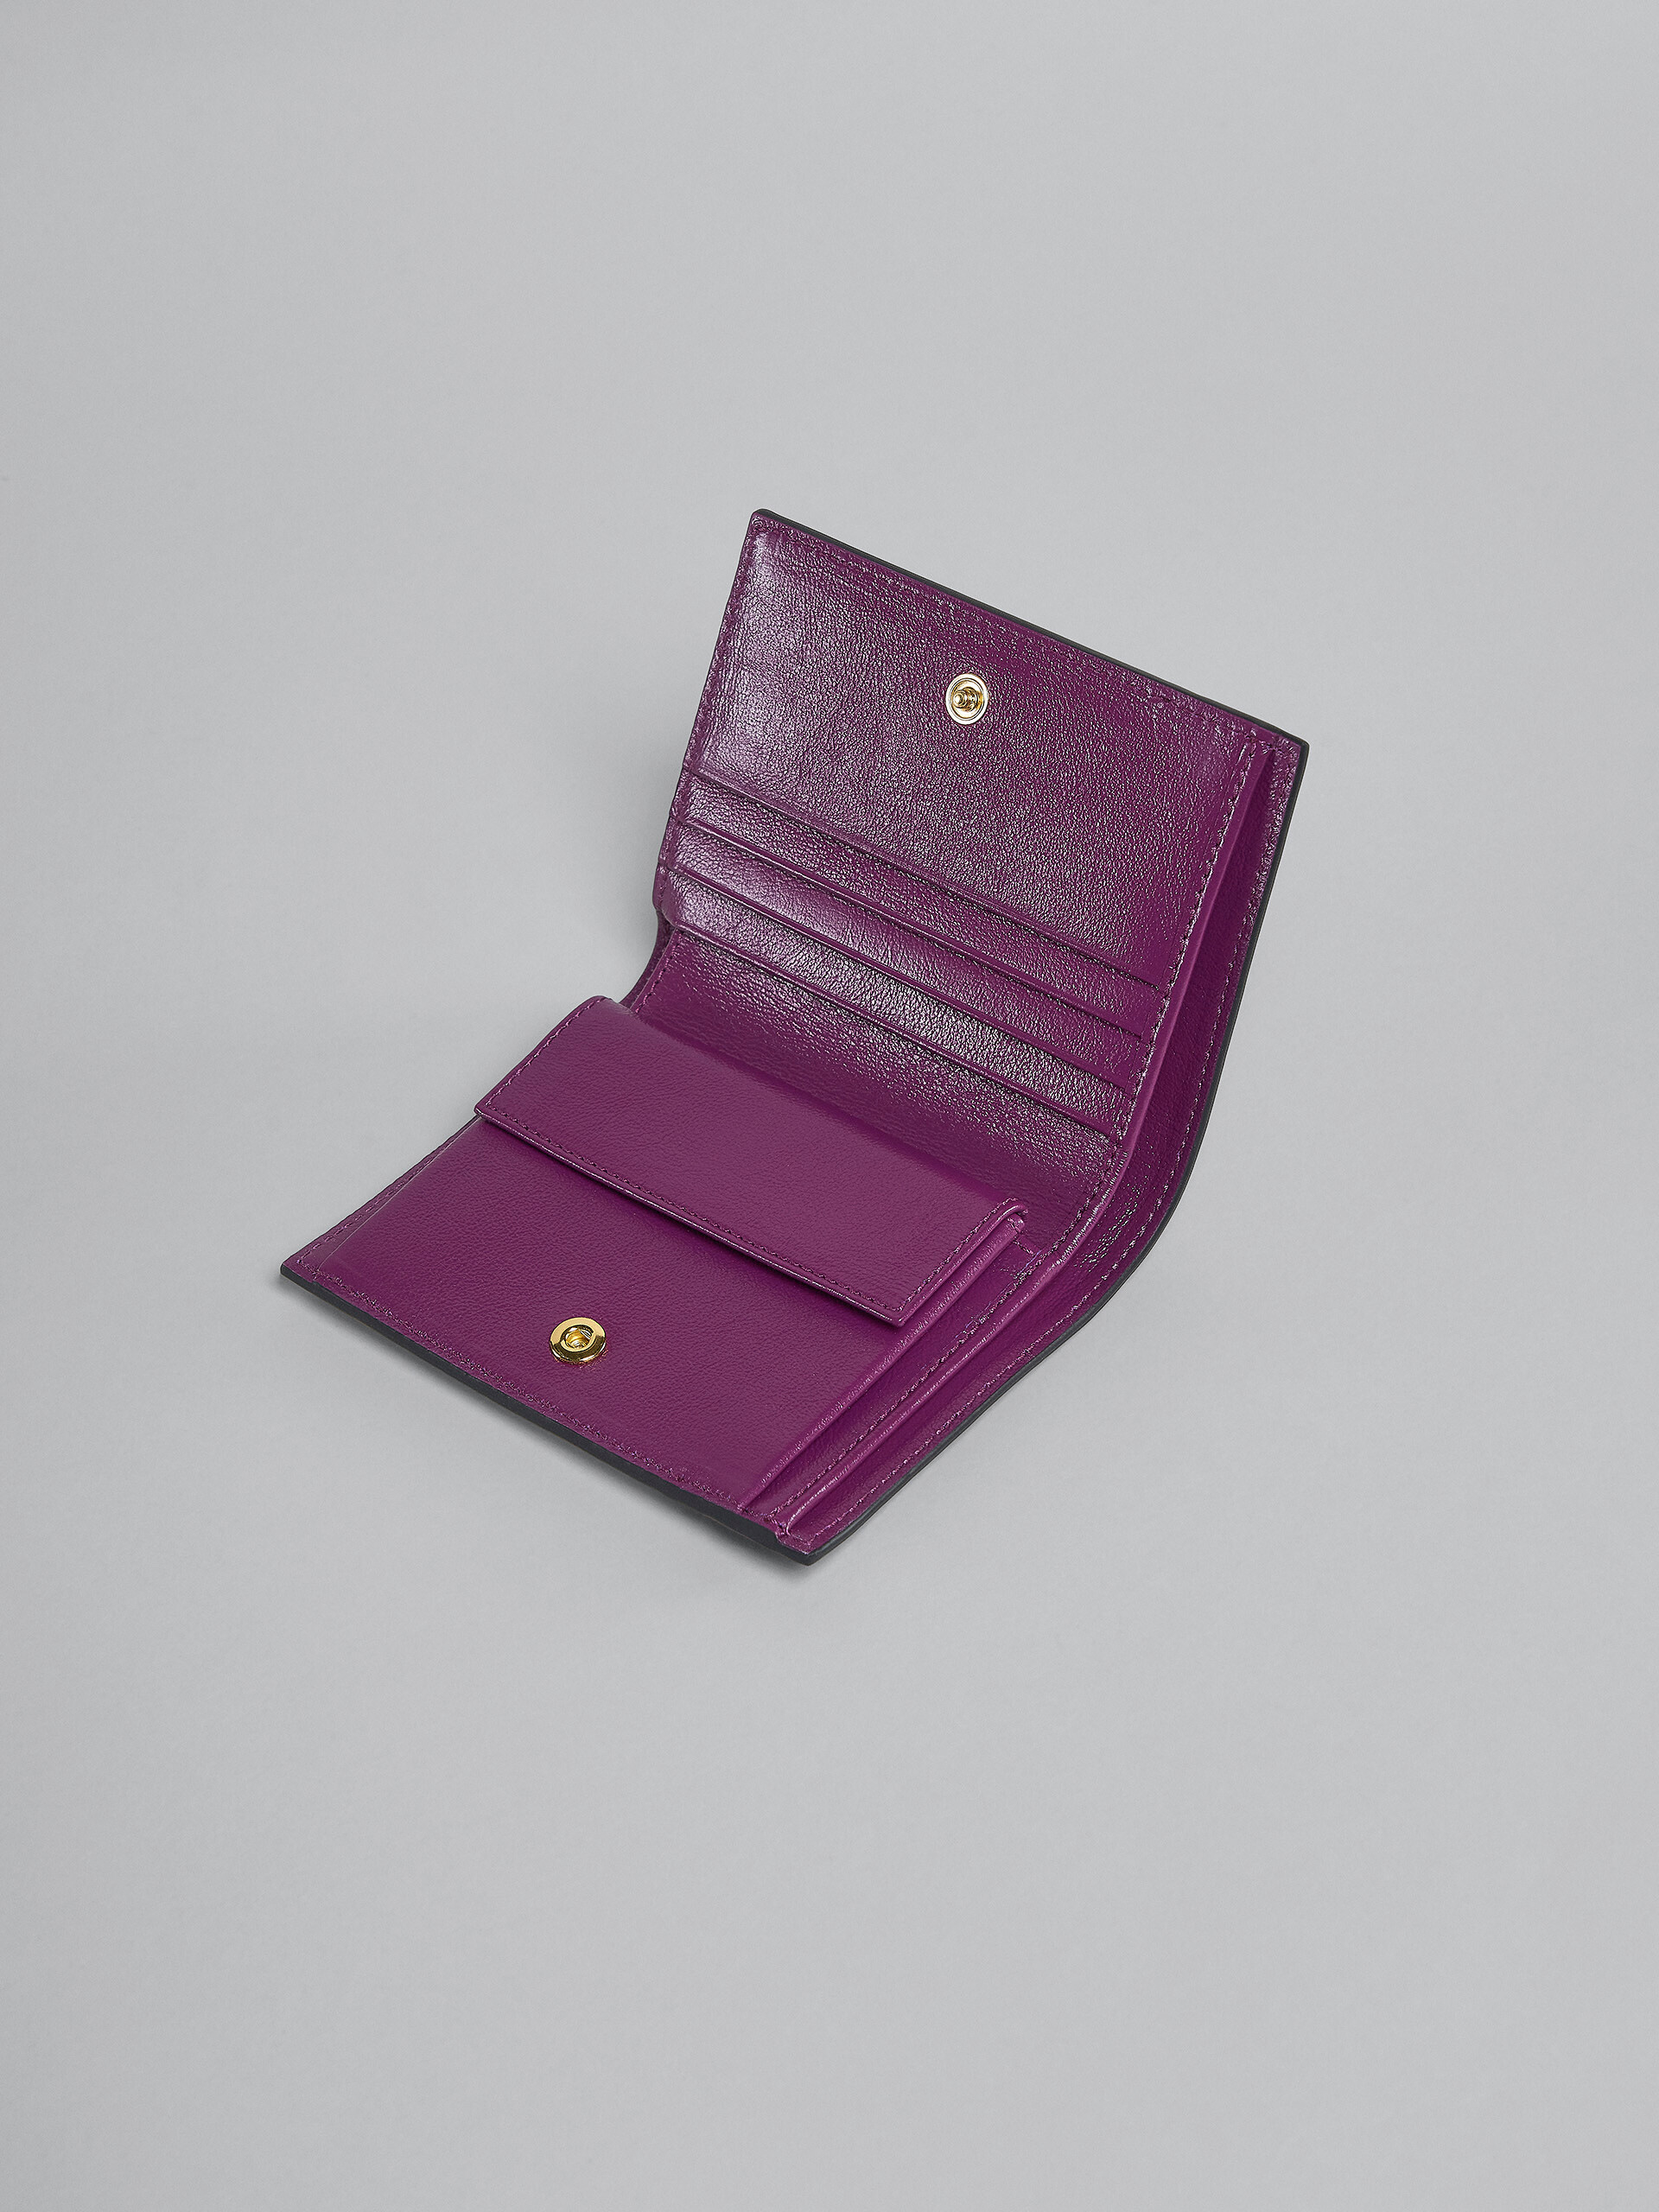 Purple and white leather bi-fold wallet - Wallets - Image 4